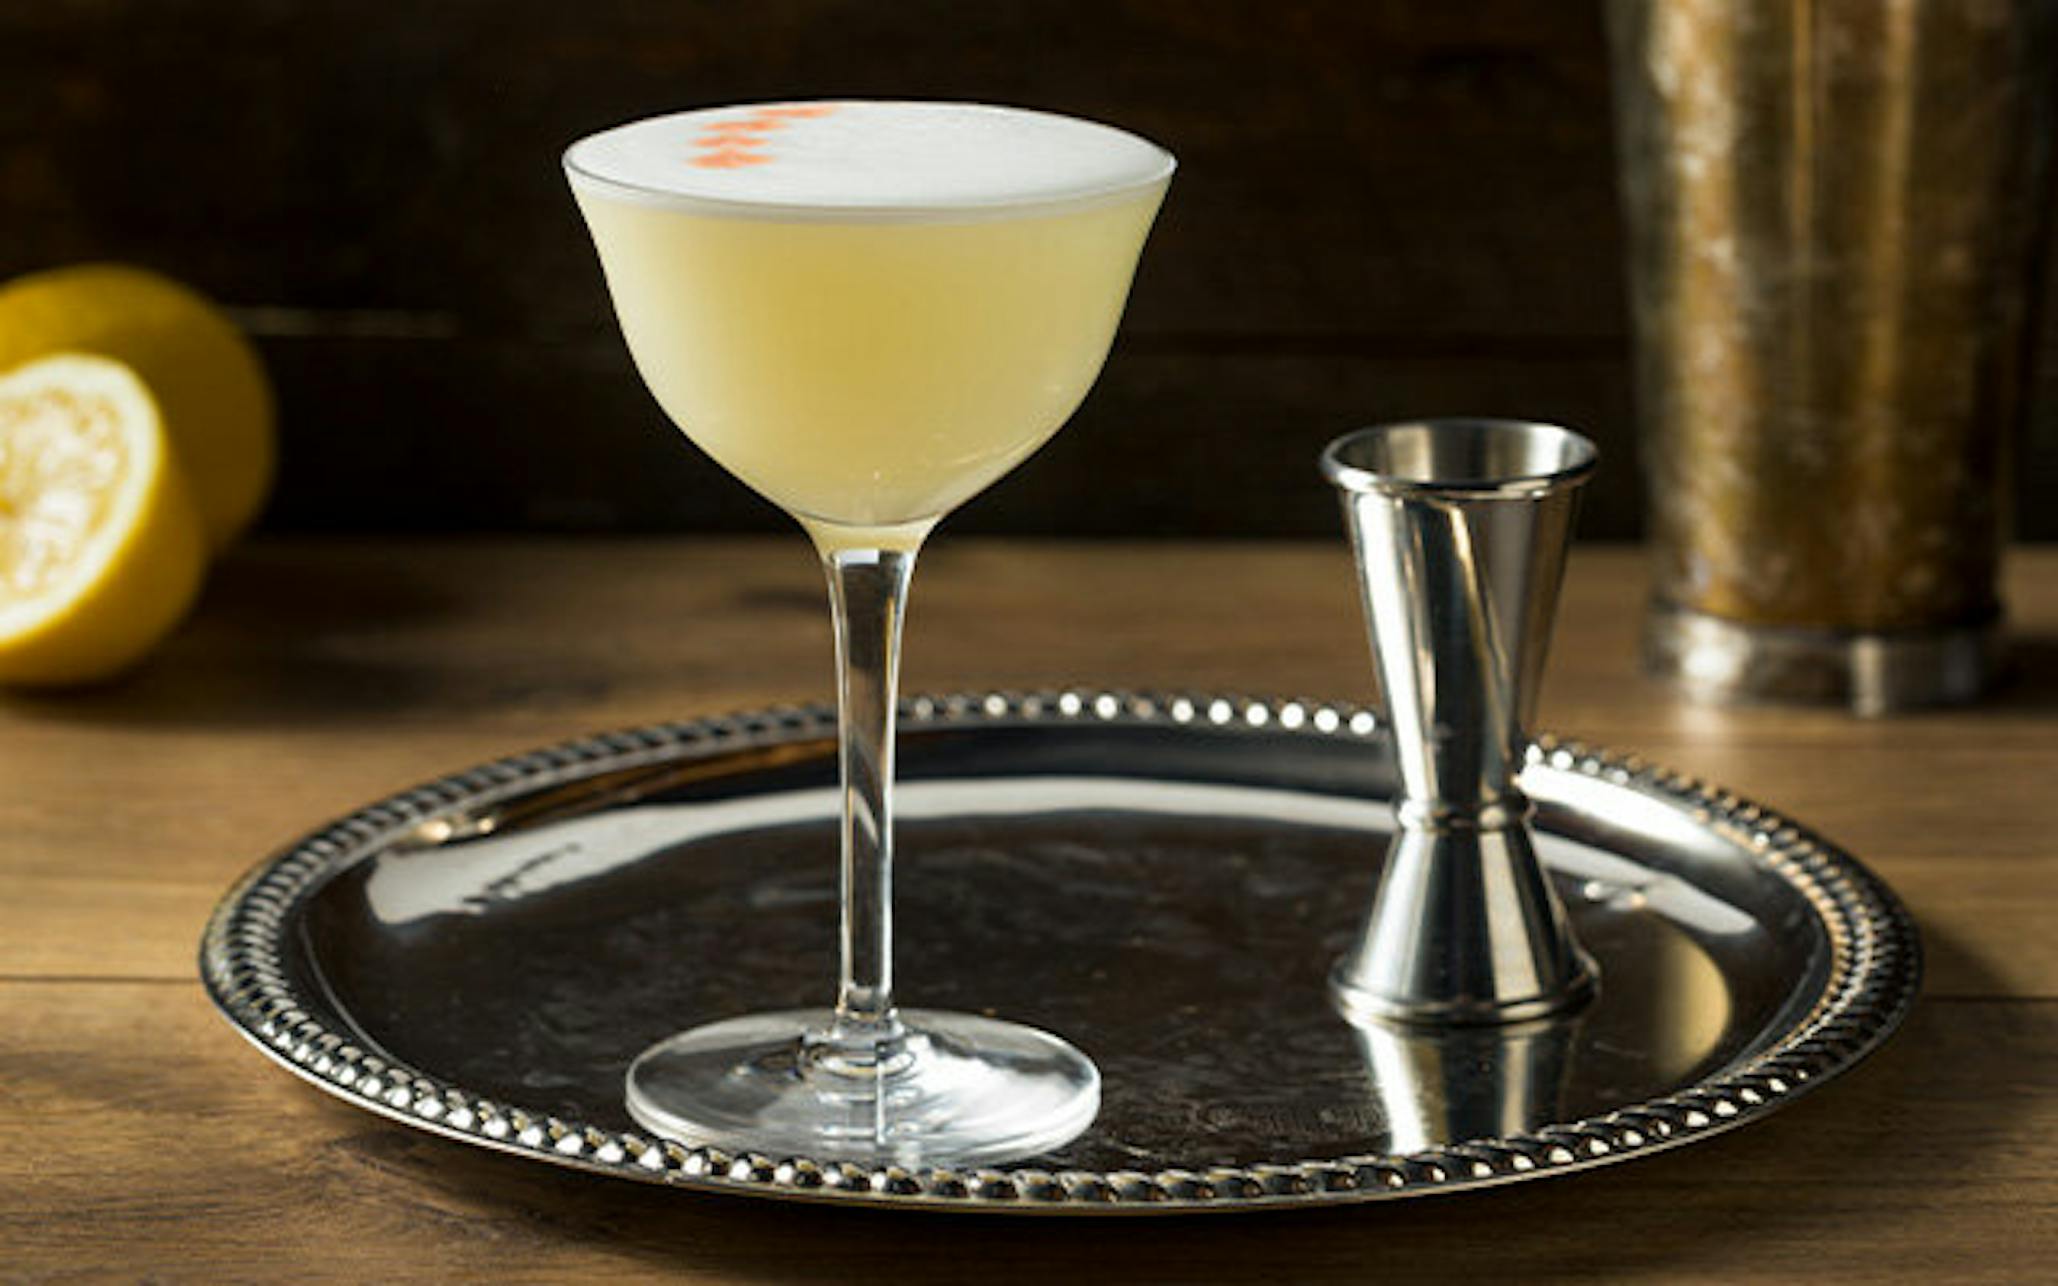 Vanilla Gin Sour cocktail on silver platter with spirit measure